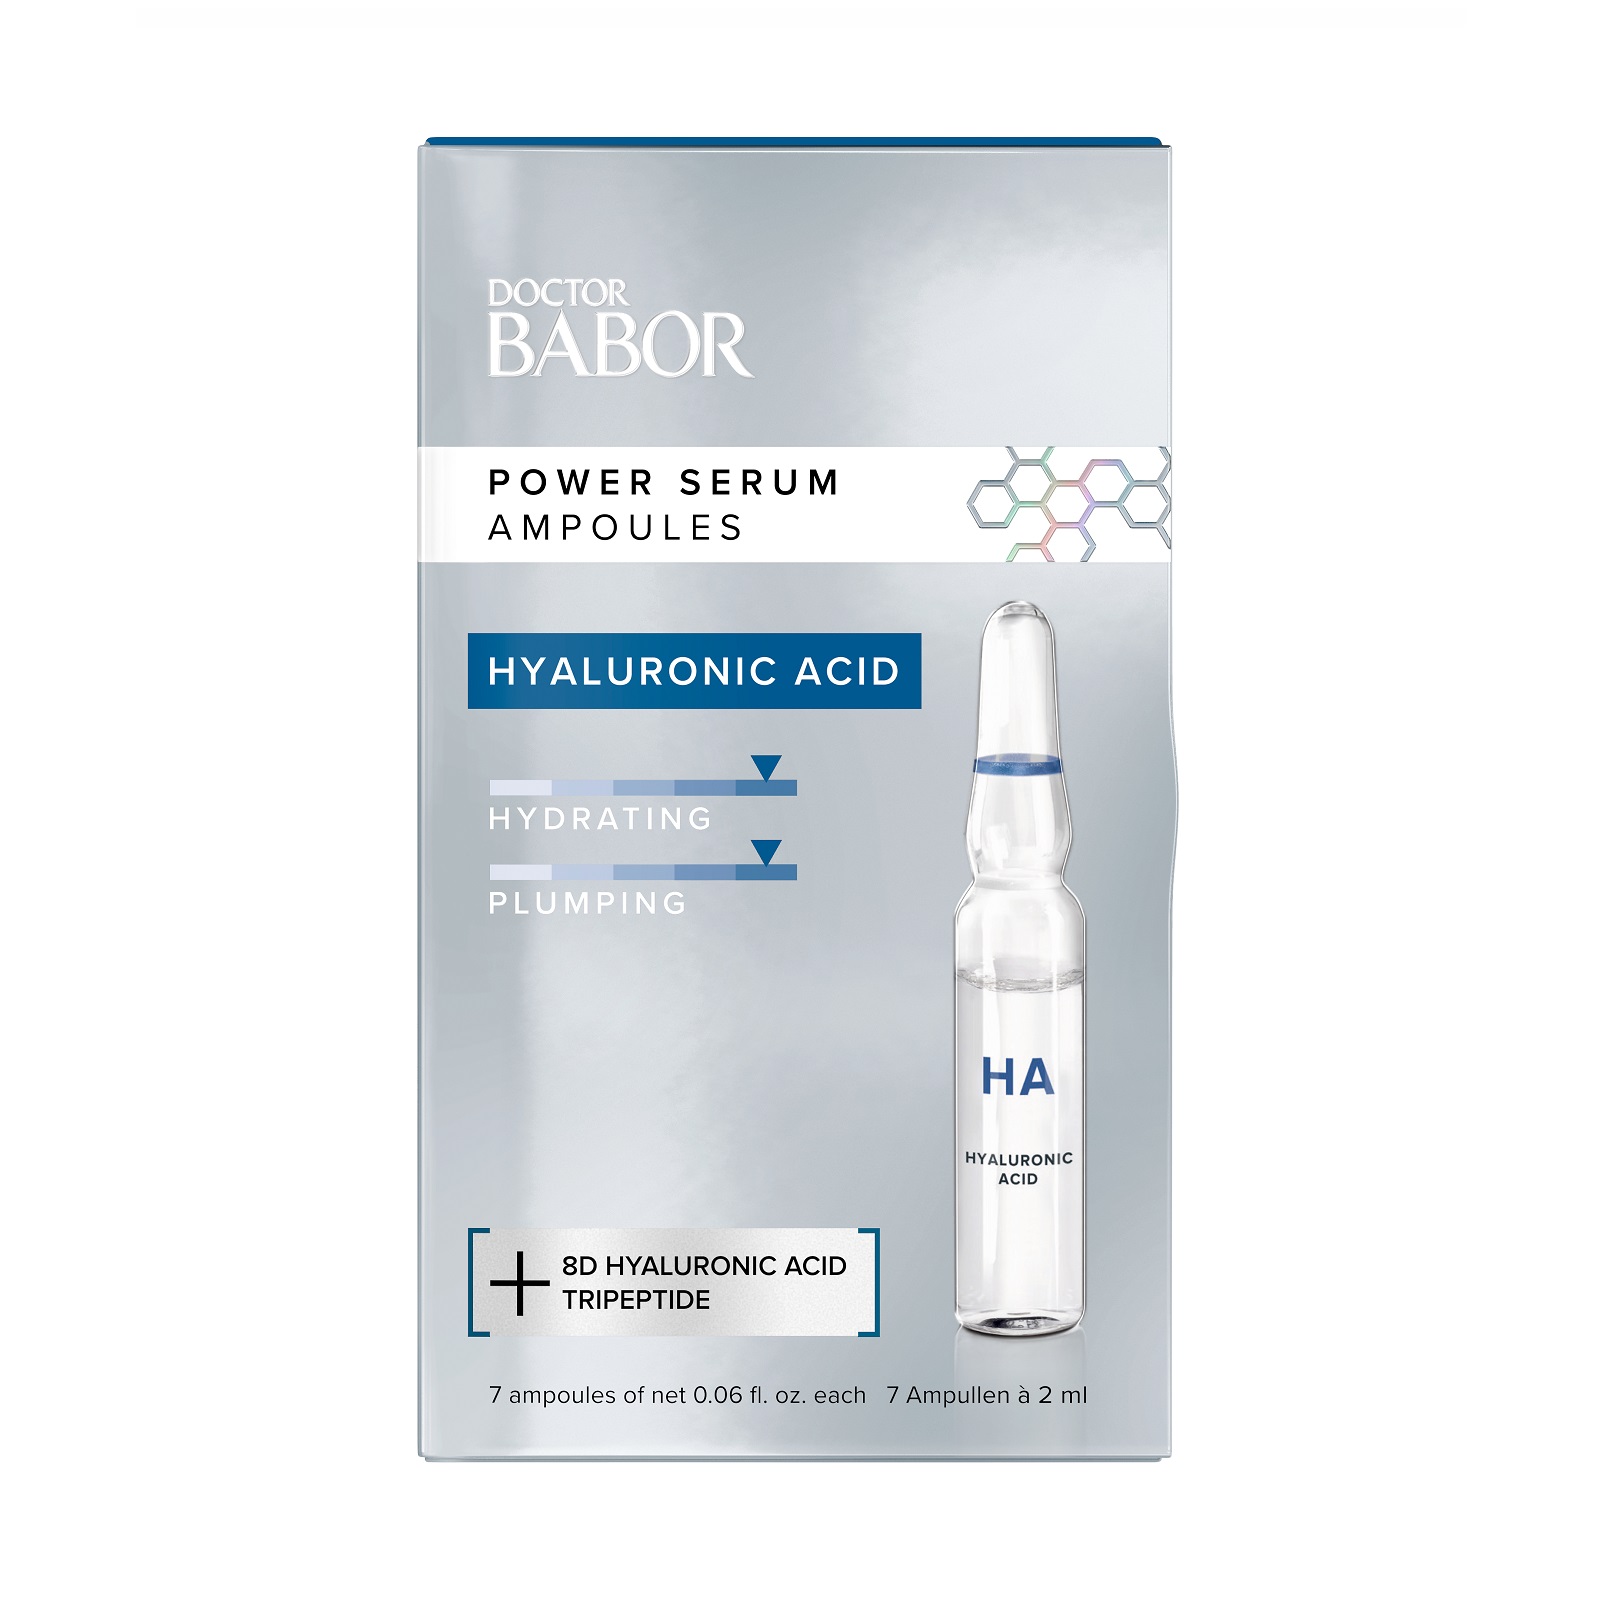 Dr. BABOR Power Serum Ampoules HYALURONIC ACID